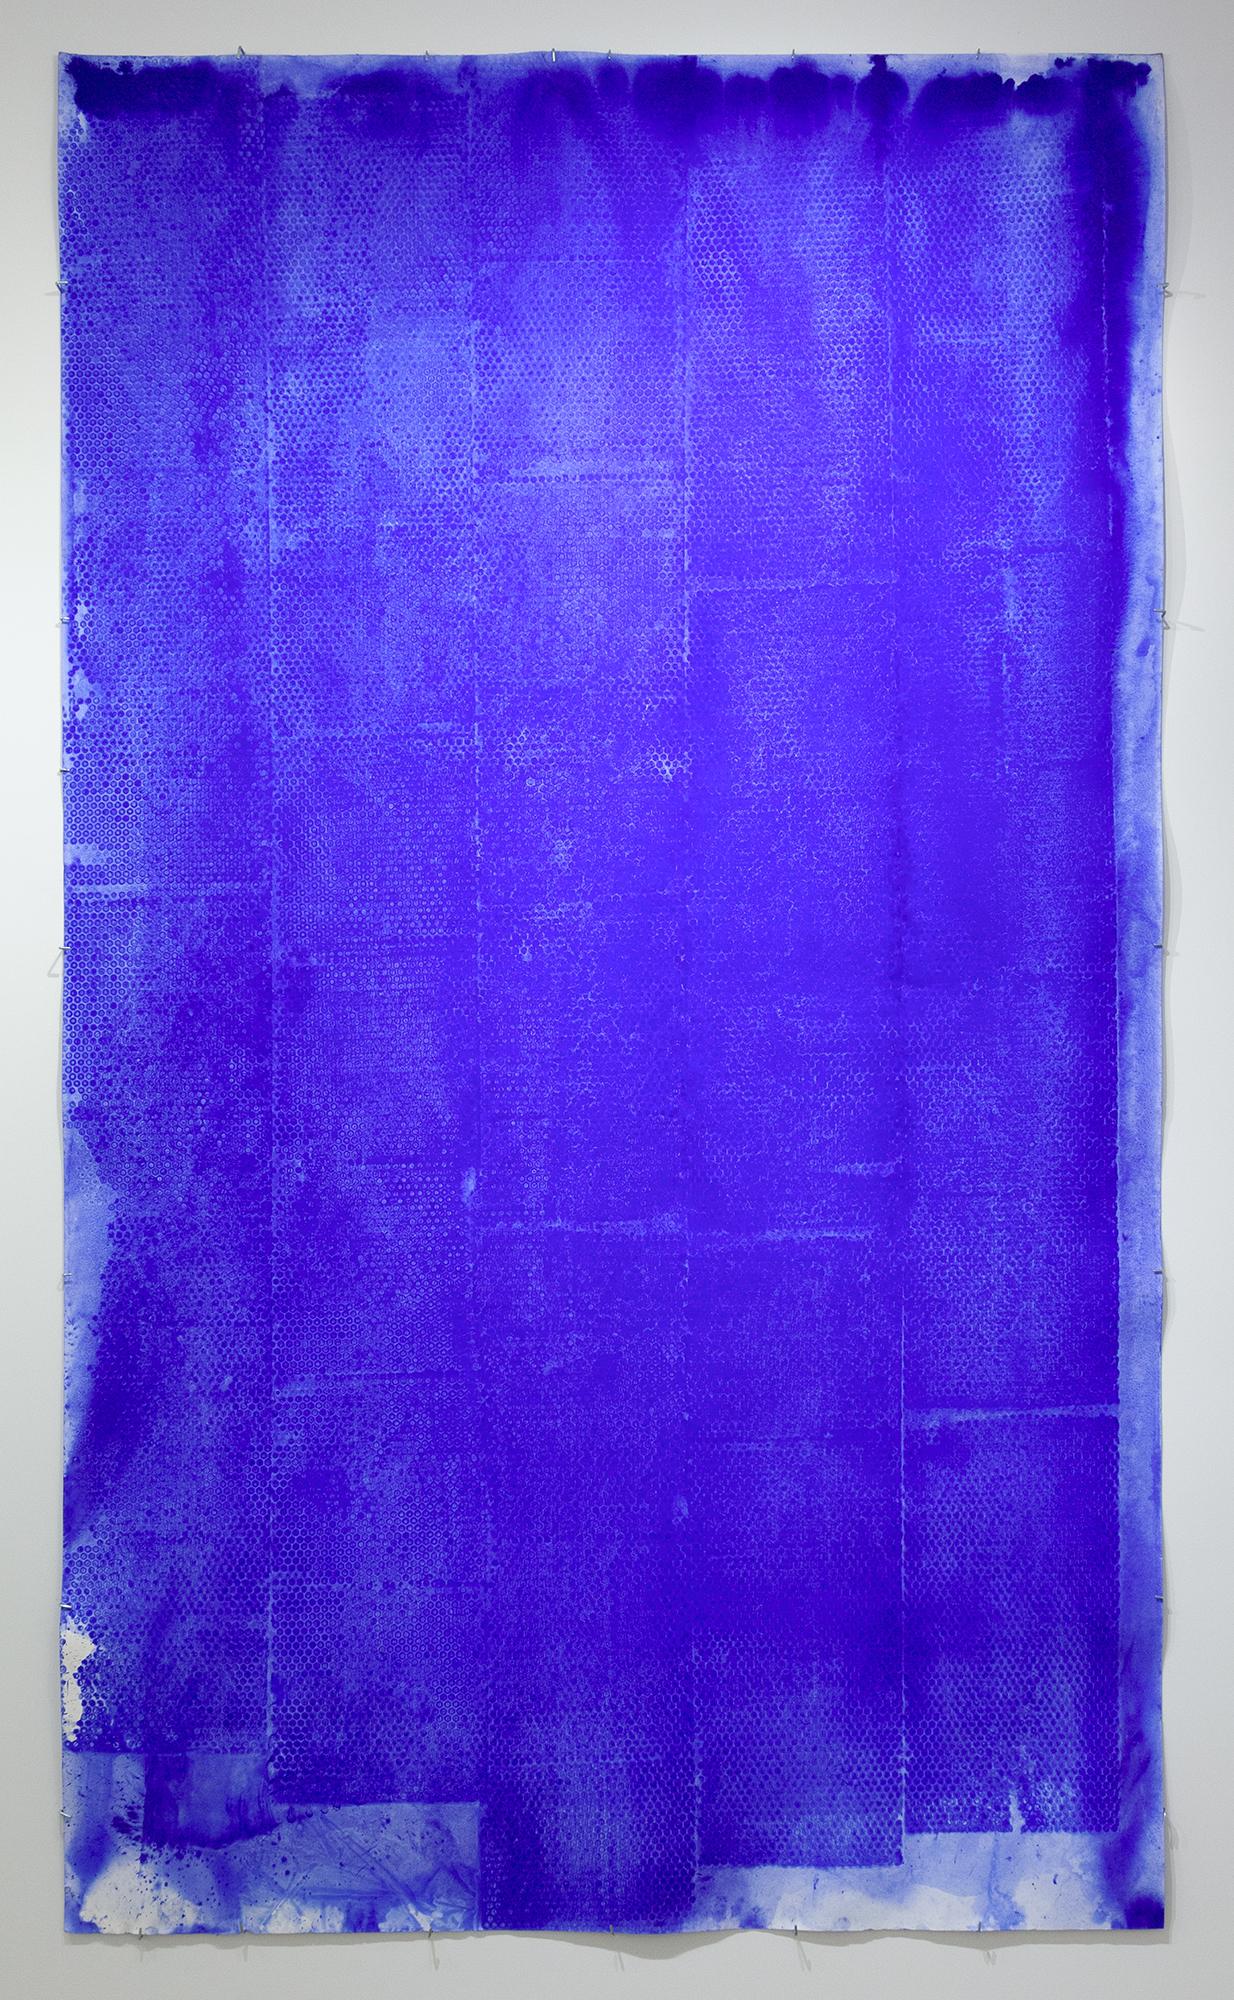 Seeking the Sound of Cobalt Blue is a series of larger paintings on 8 ply museum board and large sheets of rag paper that have been created since the winter of 2016. 

Using domestic construction materials from her garage, extras from home